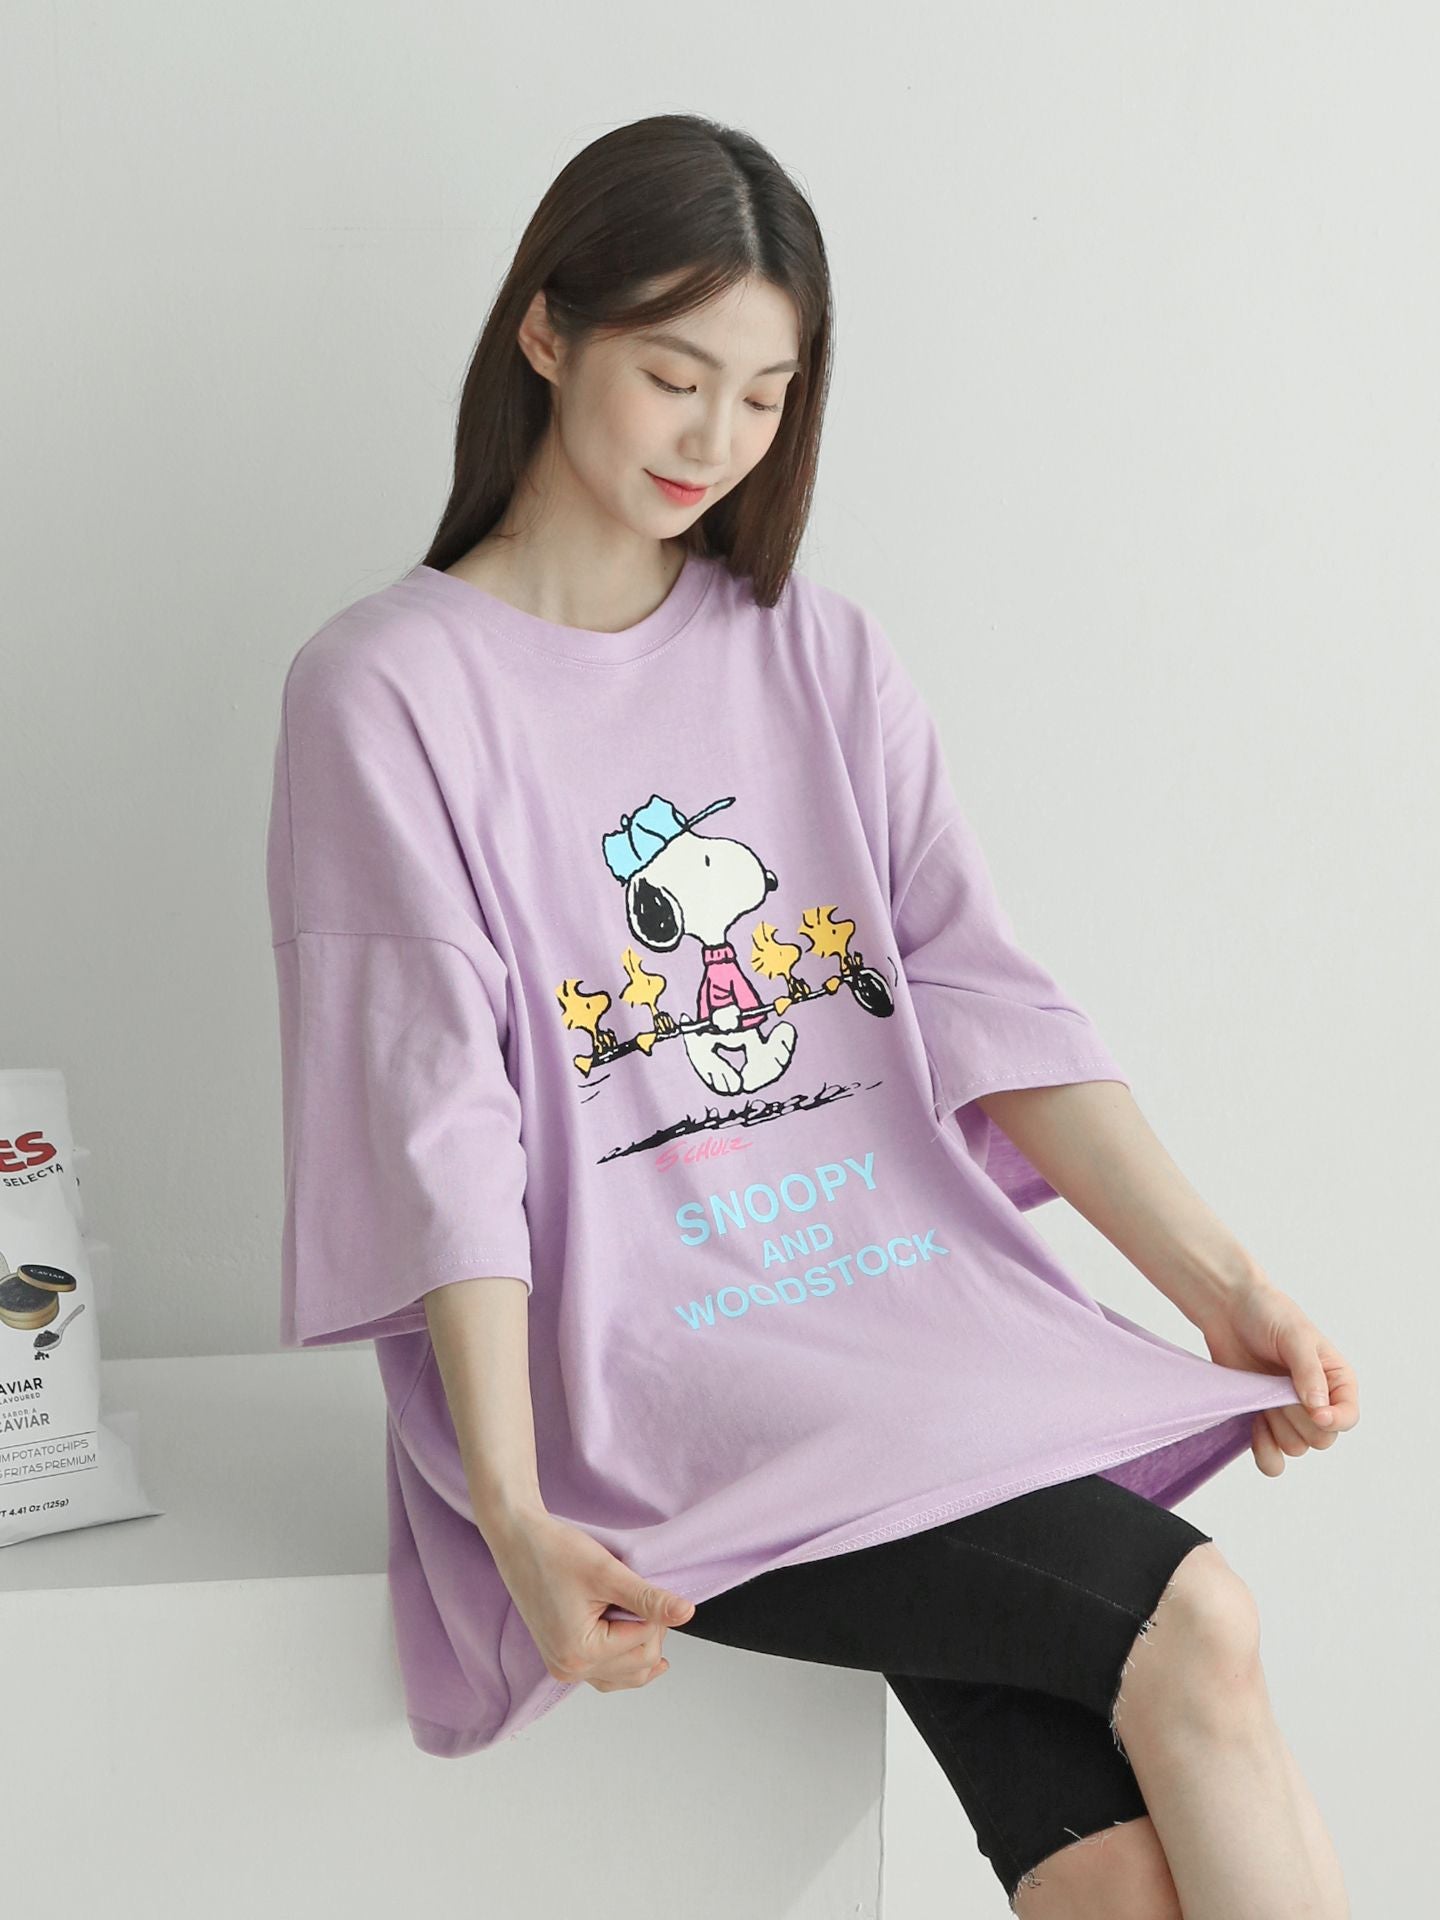 Loose fit Holding Snoopy Branch Going Forward T-Shirts 3 Colors